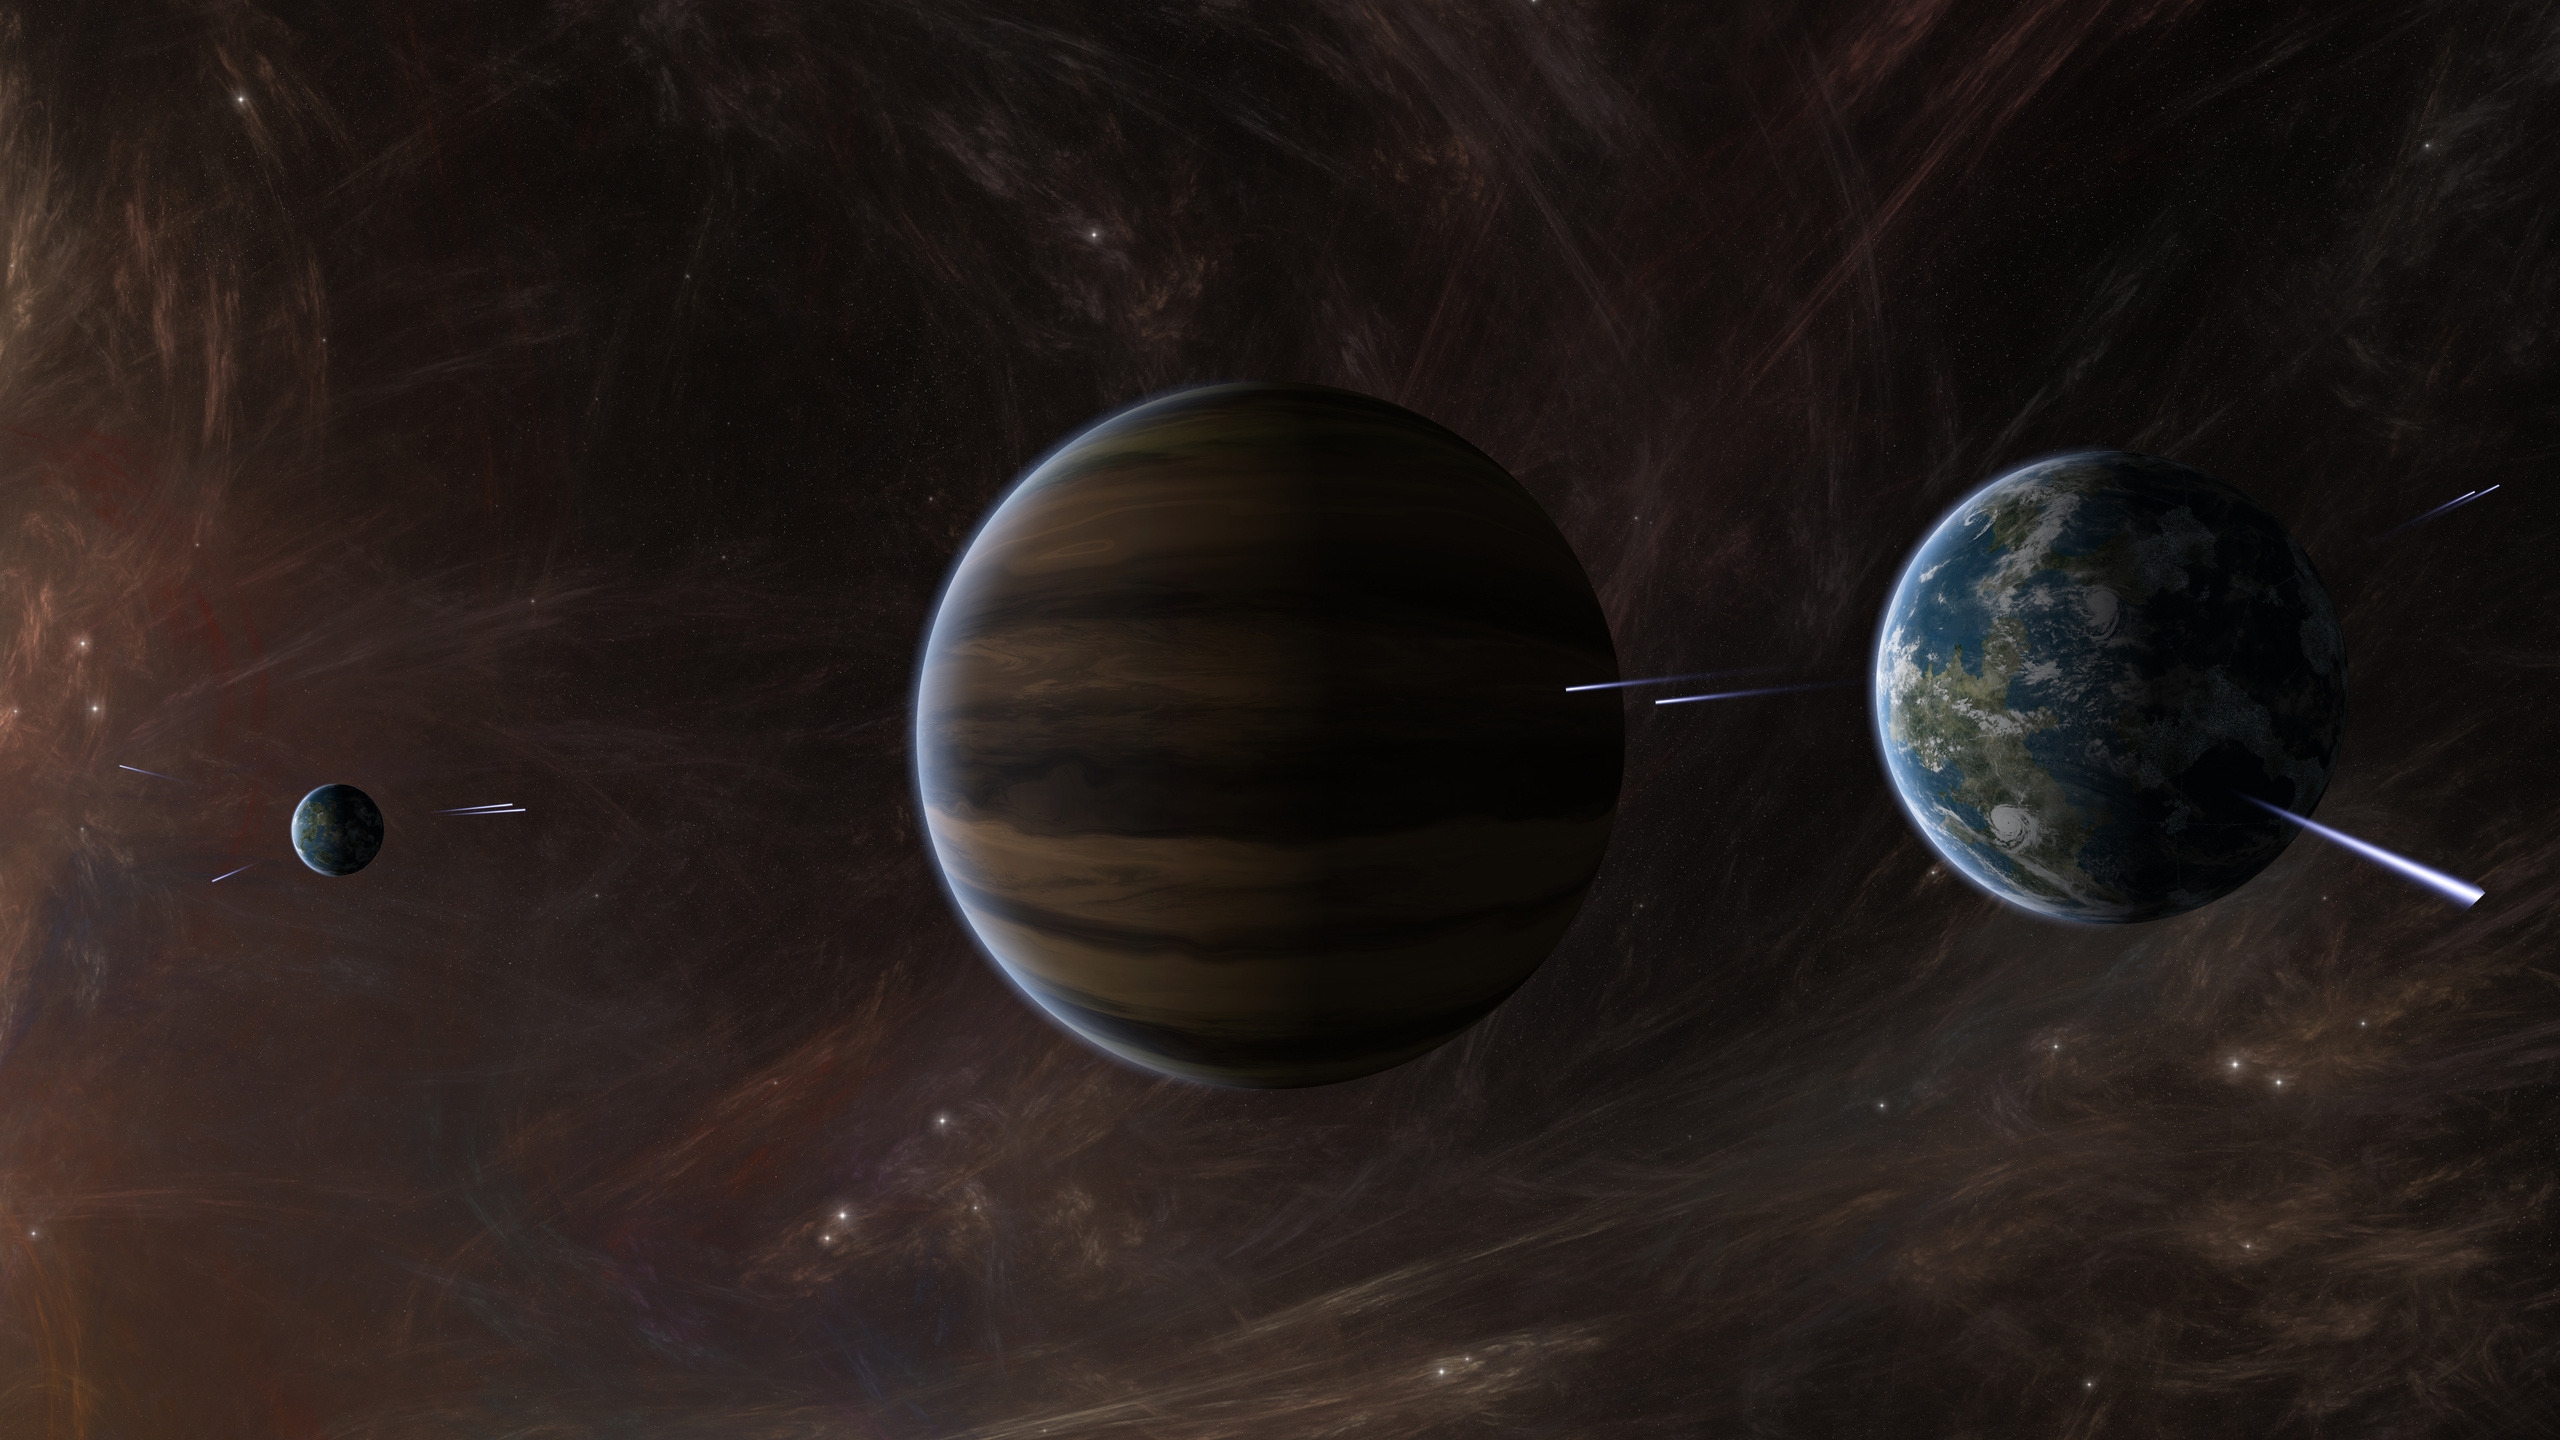 Space Planets Activity for 2560x1440 HDTV resolution